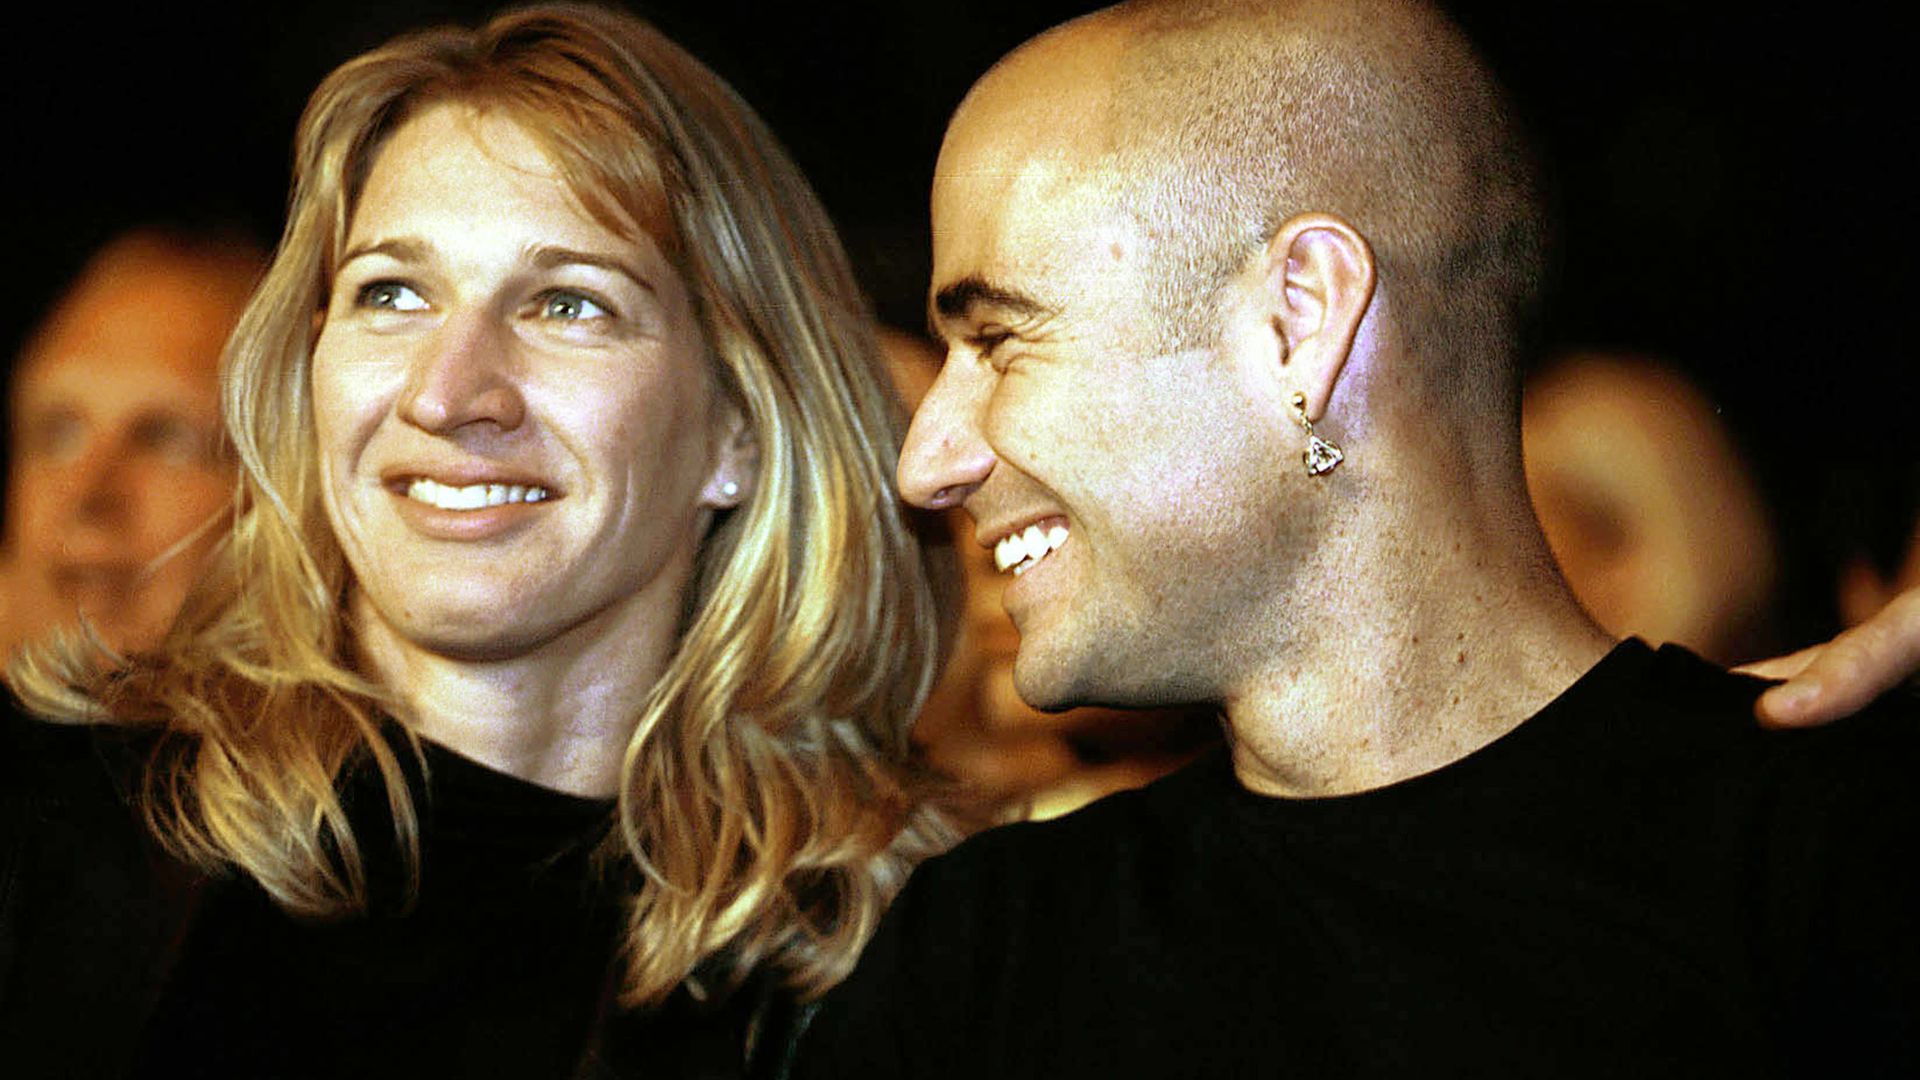 Andre Agassi’s Mother's Day tribute to Steffi Graff will melt your heart